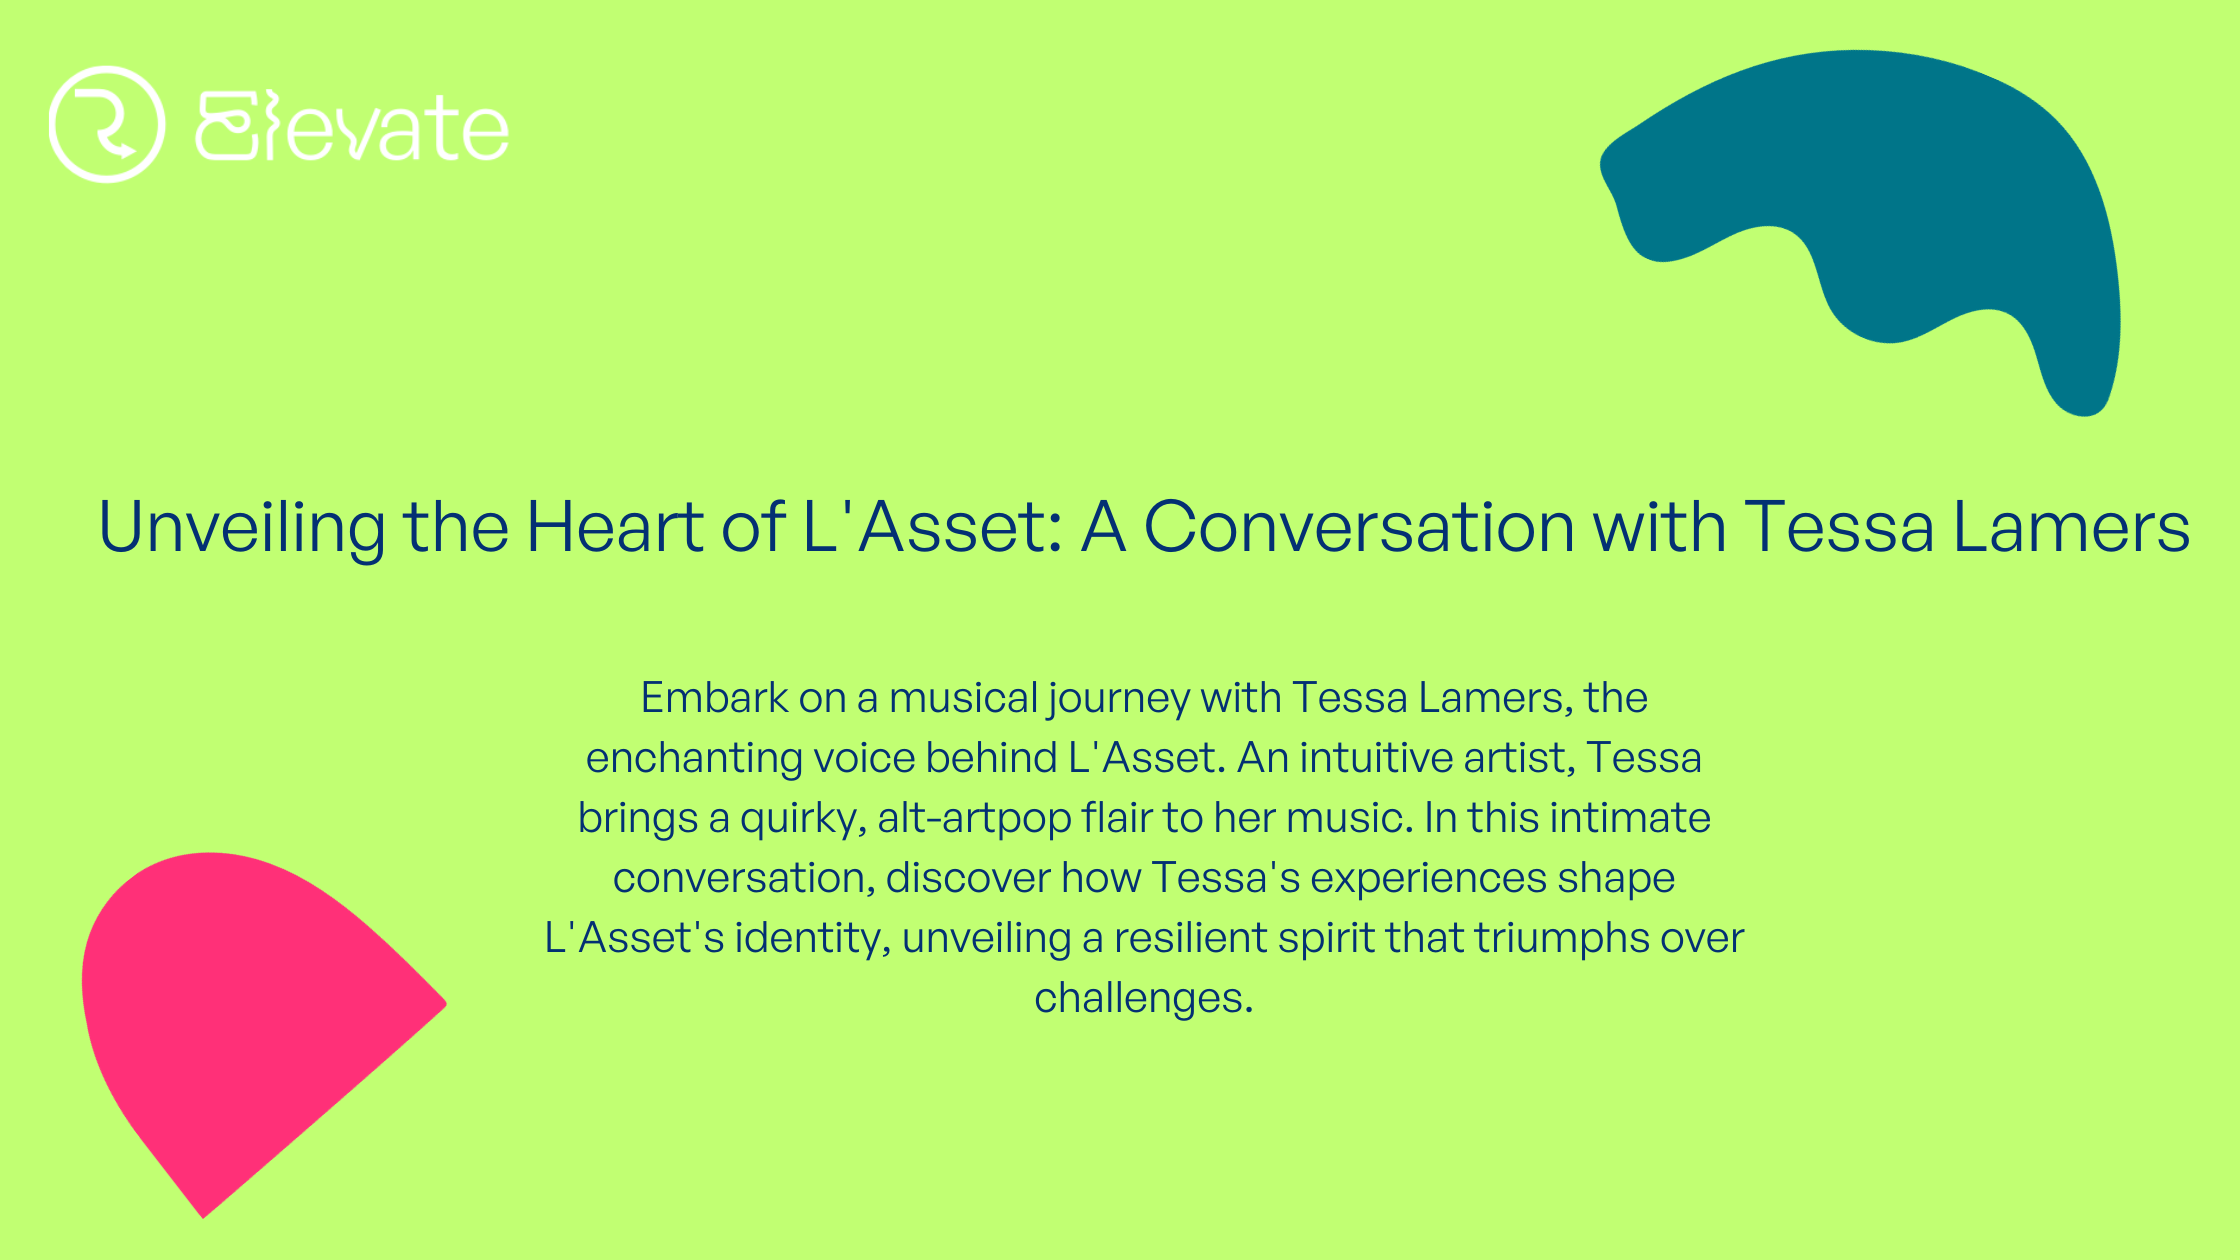 Unveiling the Heart of L’Asset: A Conversation with Tessa Lamers